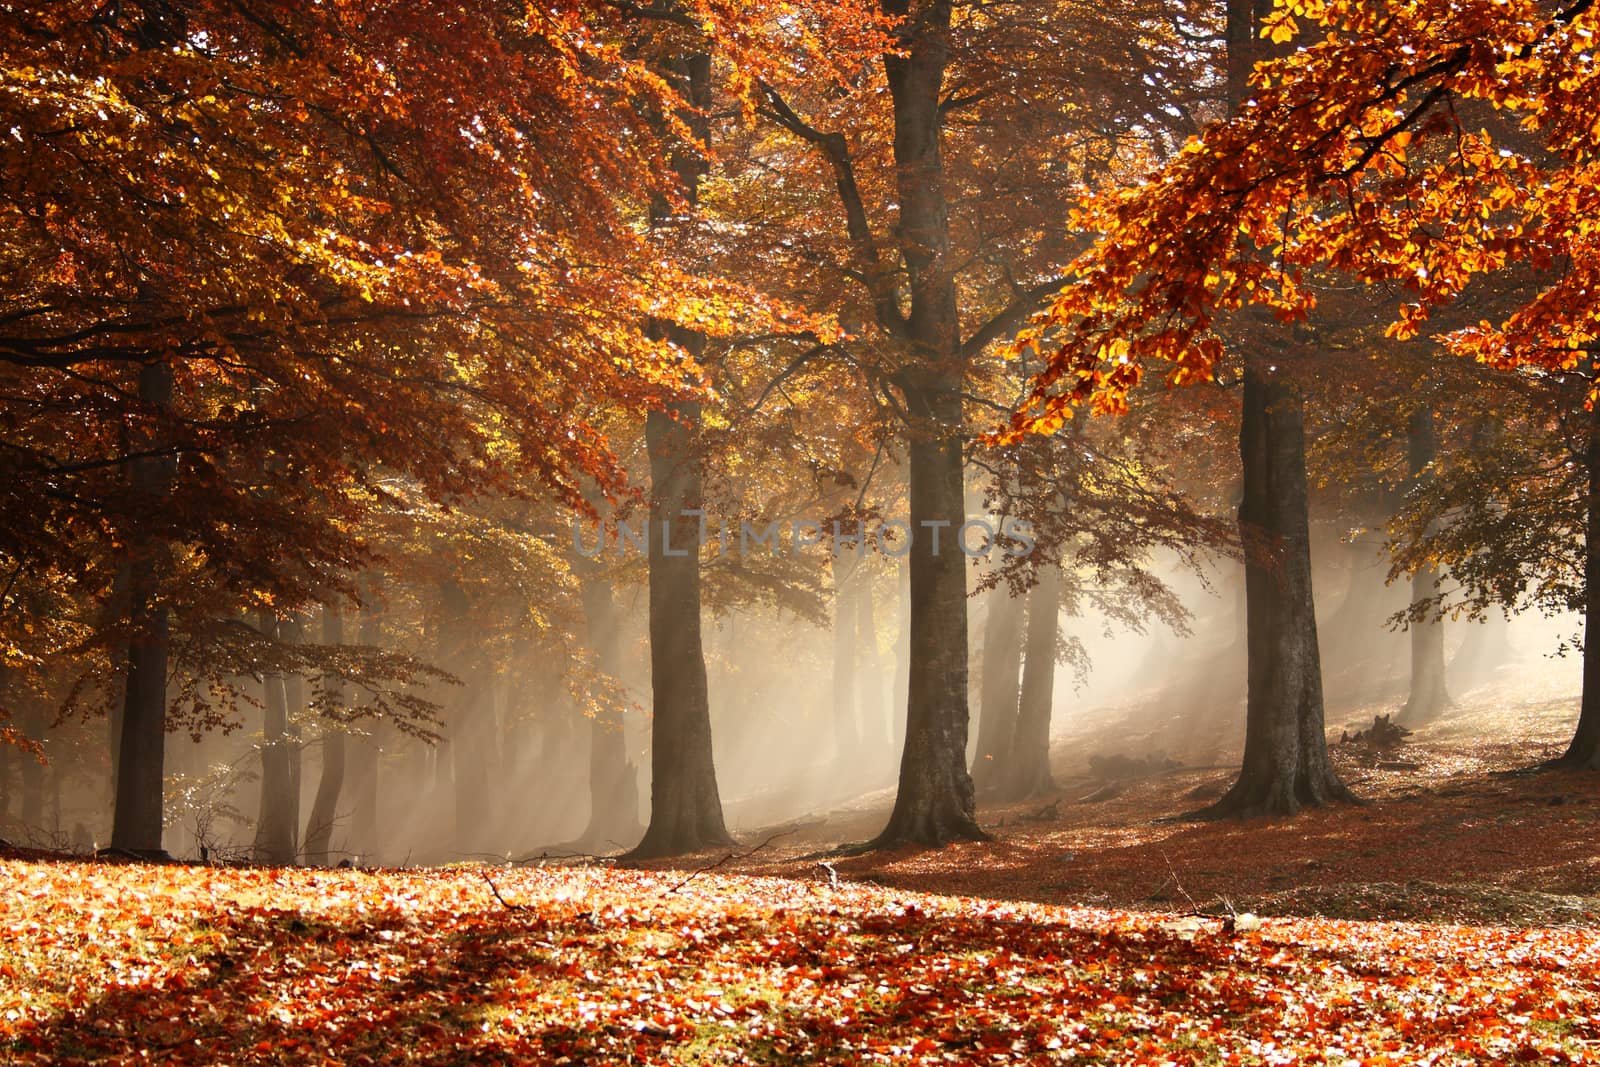 Nice sun rays through the fog and branches of trees in autumn, with brown leafs and misty atmosphere.